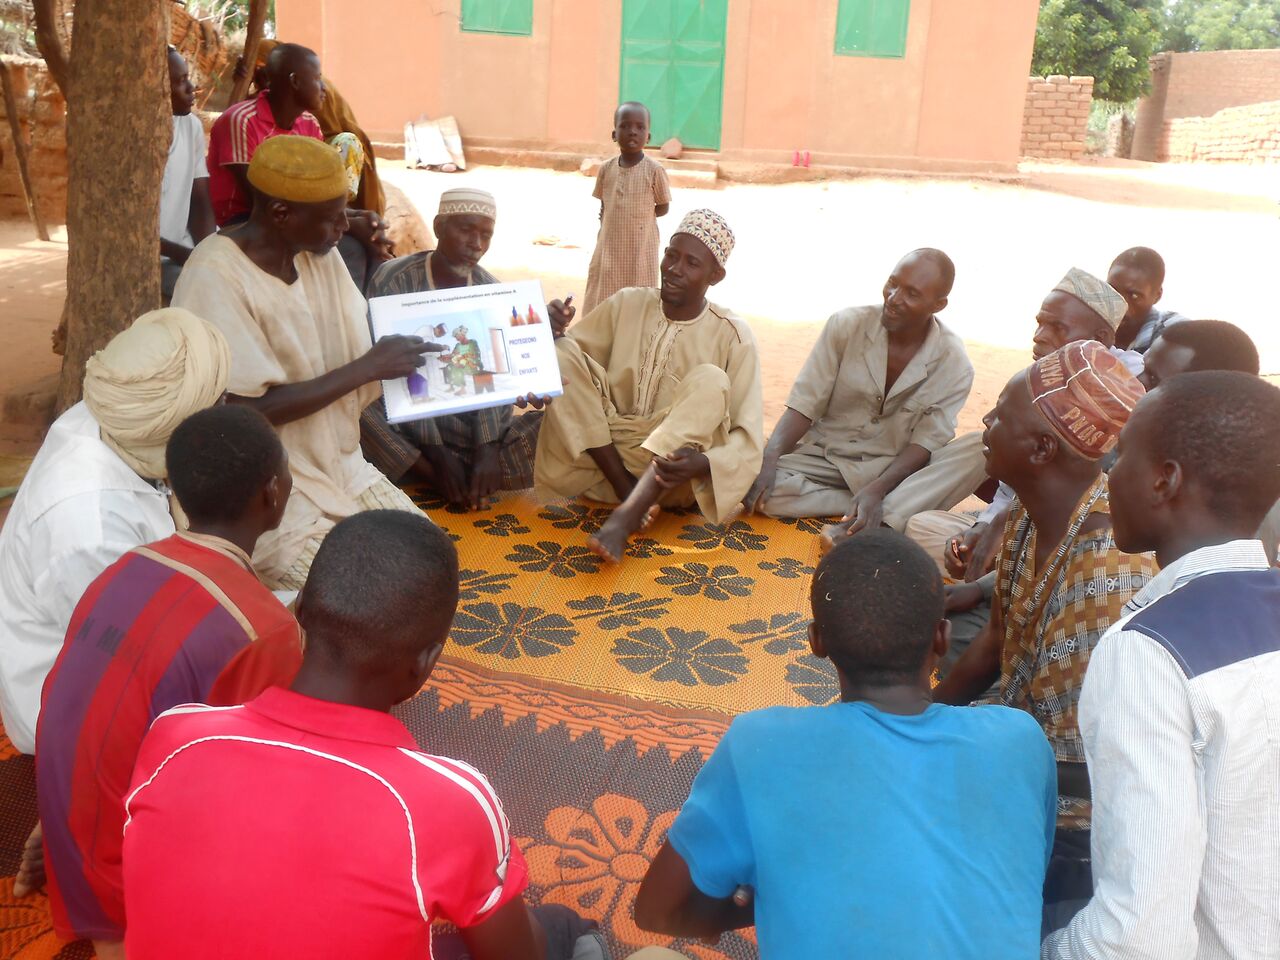 Husbands' School nutrition education session in the village of Toudoun Baouchi, Niger